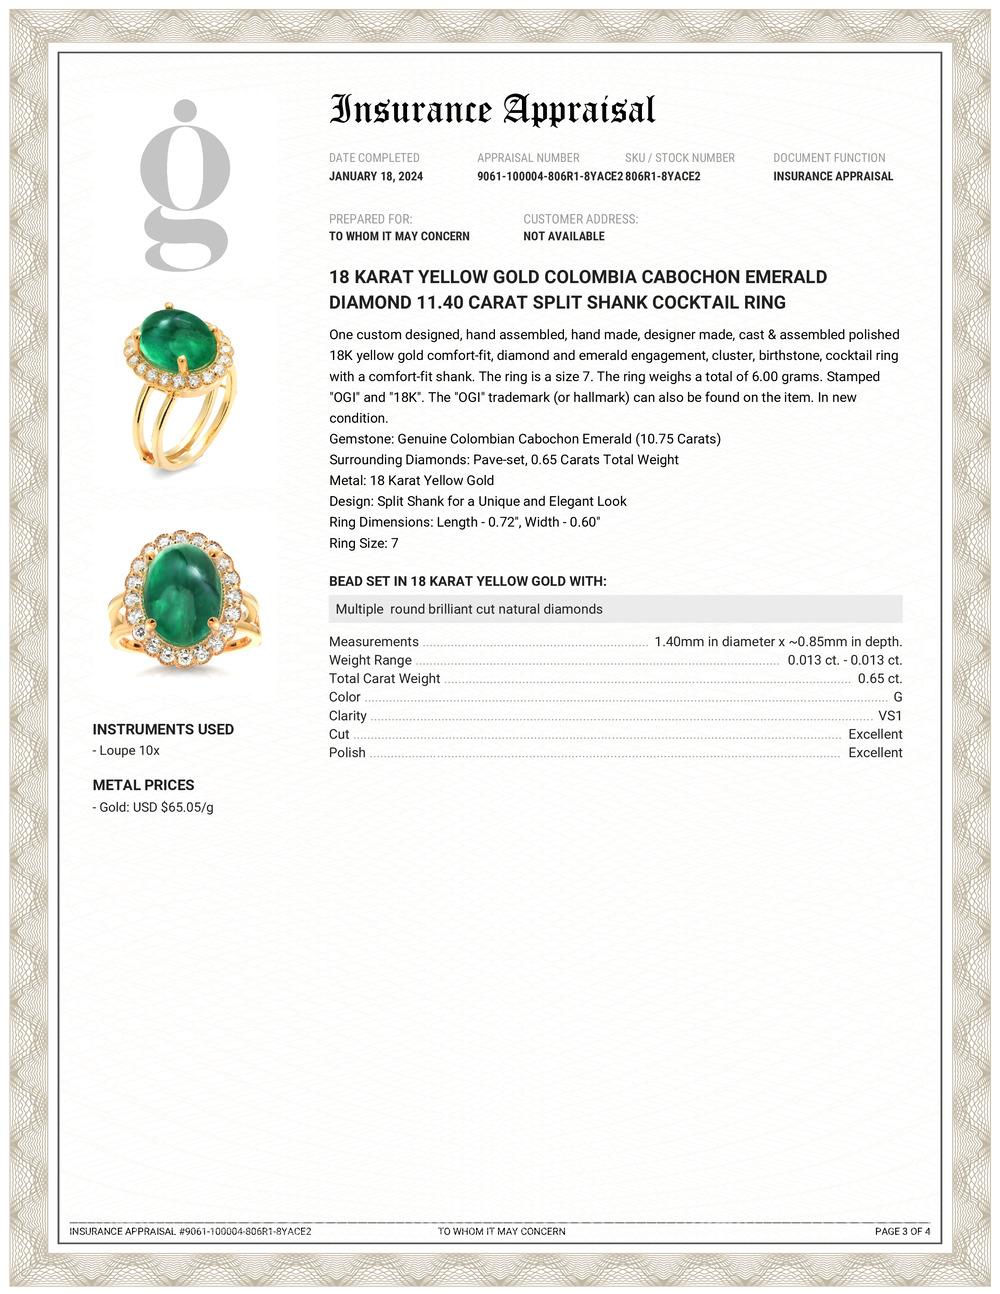 Elevate your style with our exquisite Colombian Cabochon Emerald Diamond Cocktail Ring, a true statement piece that effortlessly combines elegance and luxury. The center of attention is a mesmerizing 10.75-carat cabochon emerald sourced directly